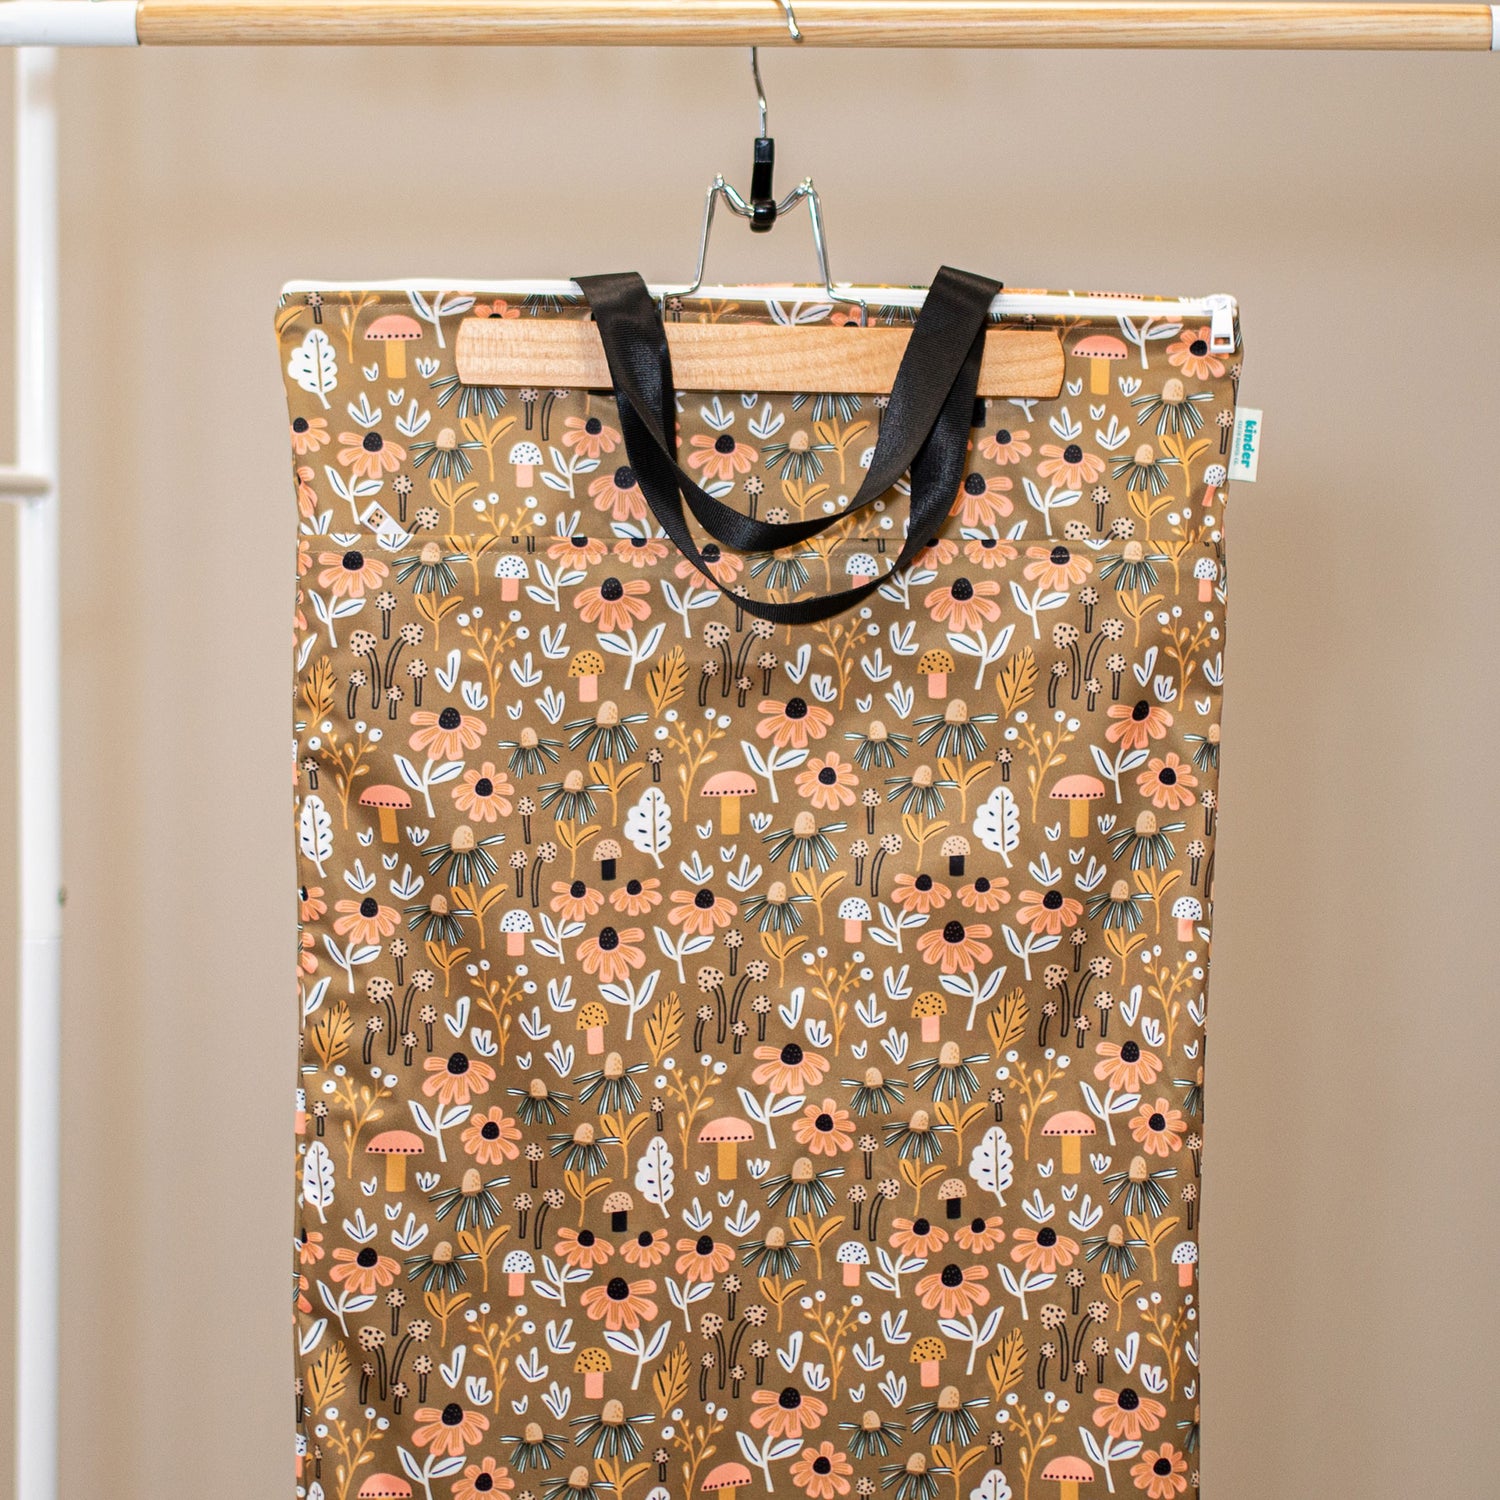 Patterned Large Zipper Hanging Wet Bag, Laundry Bag with Handles